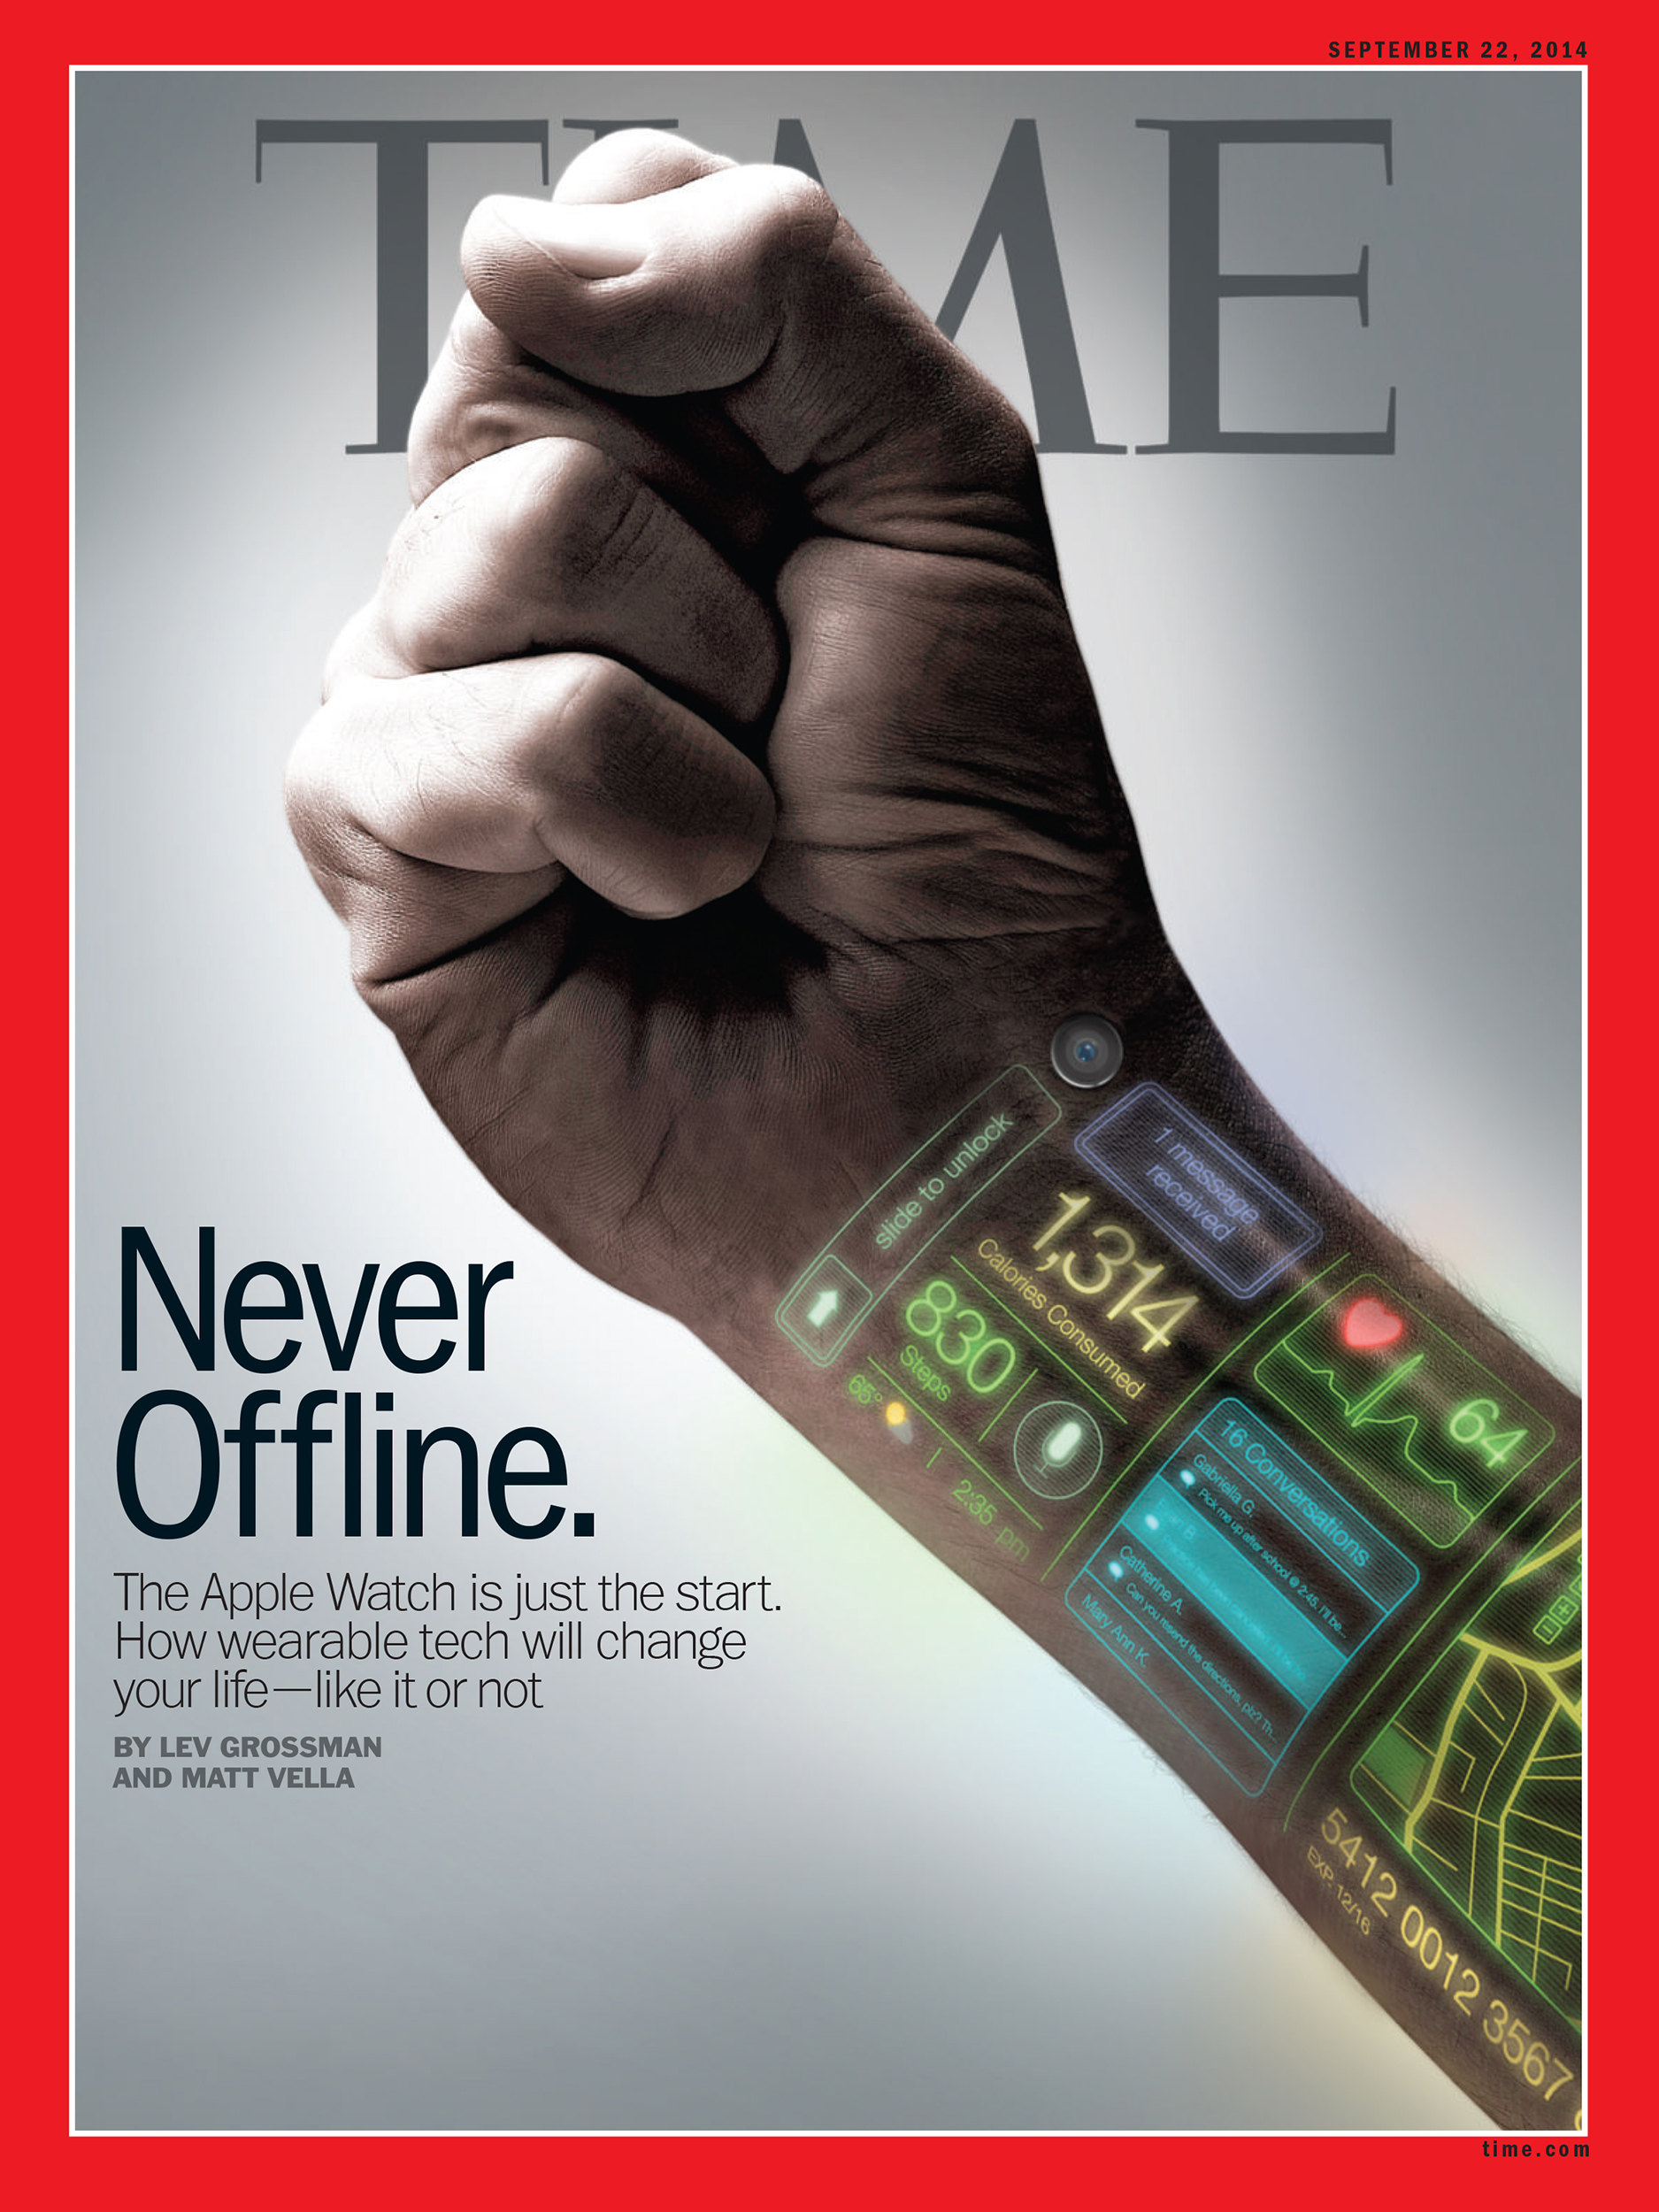 The Sep. 22, 2014 cover of TIME